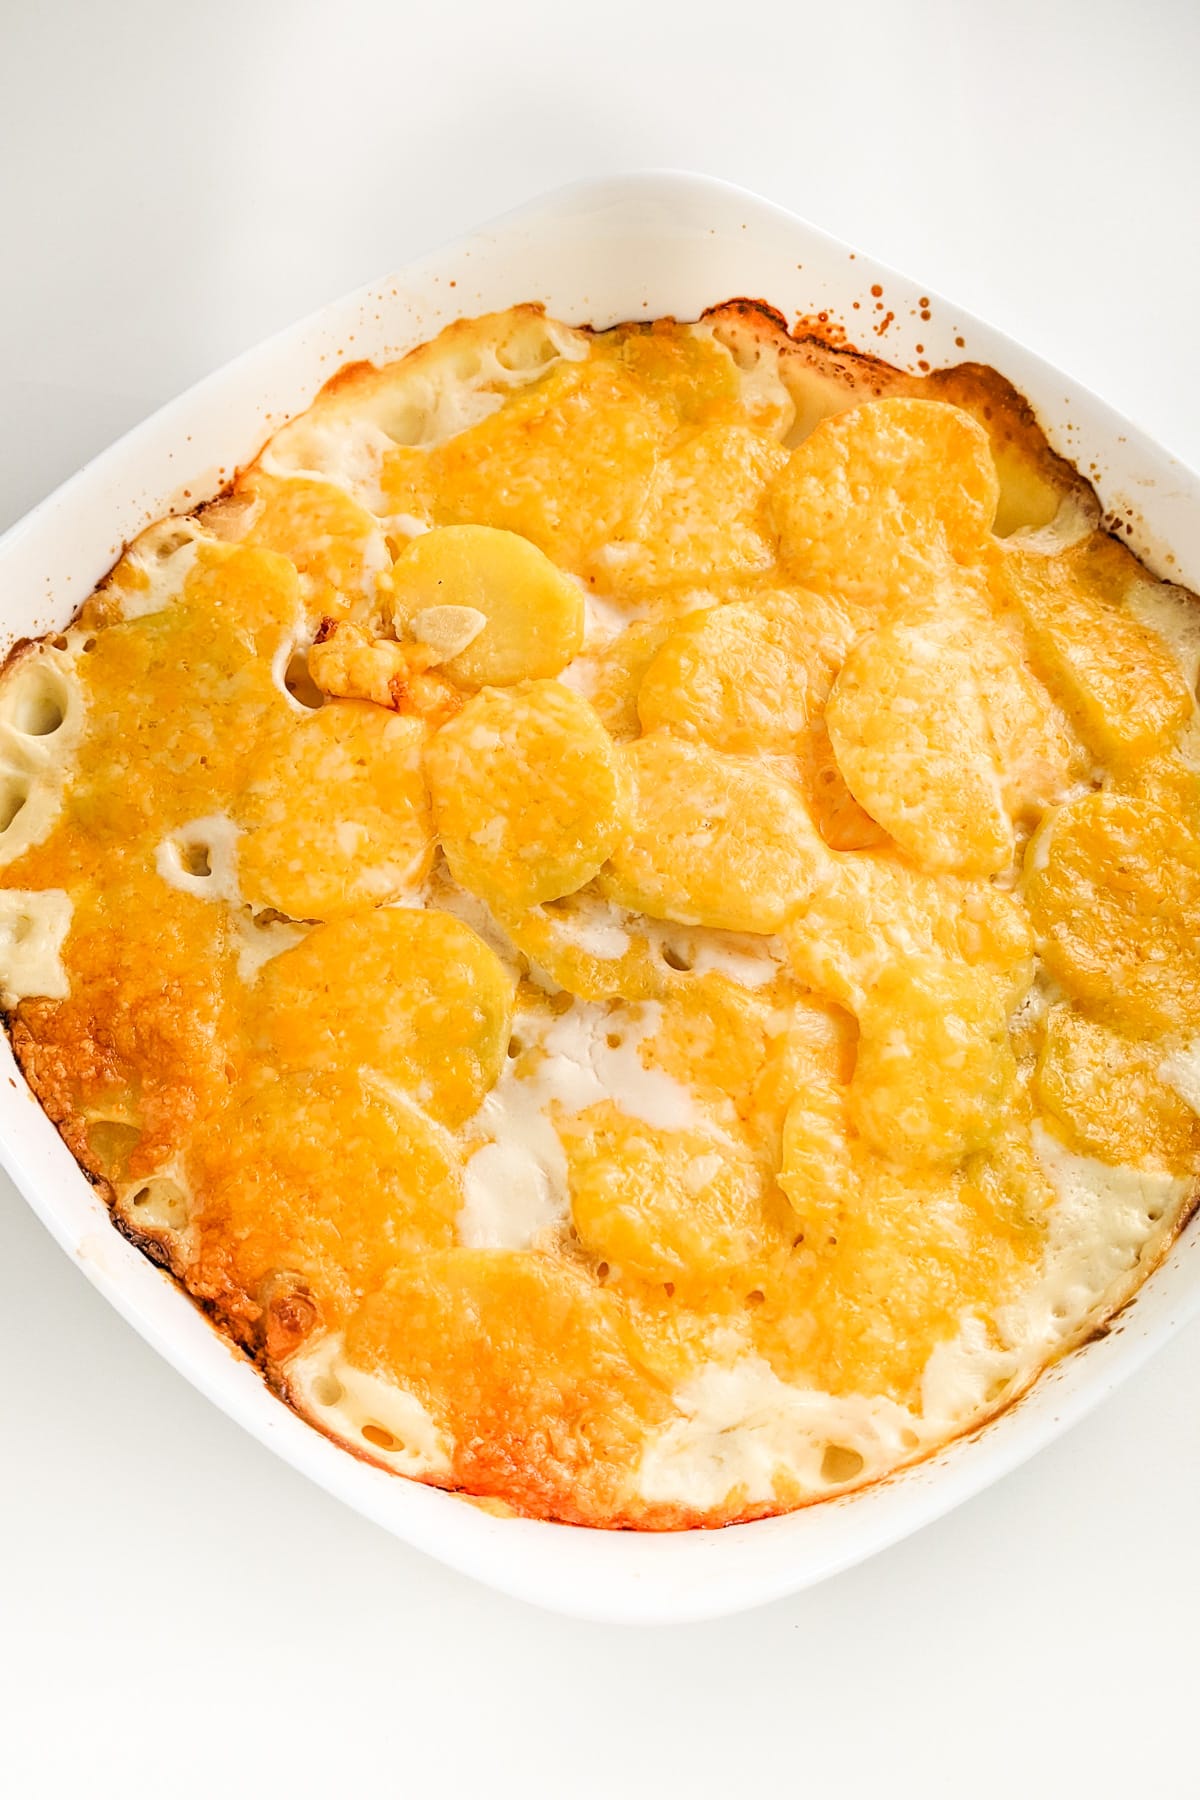 Potato bake casserole with melted cheddar cheese.